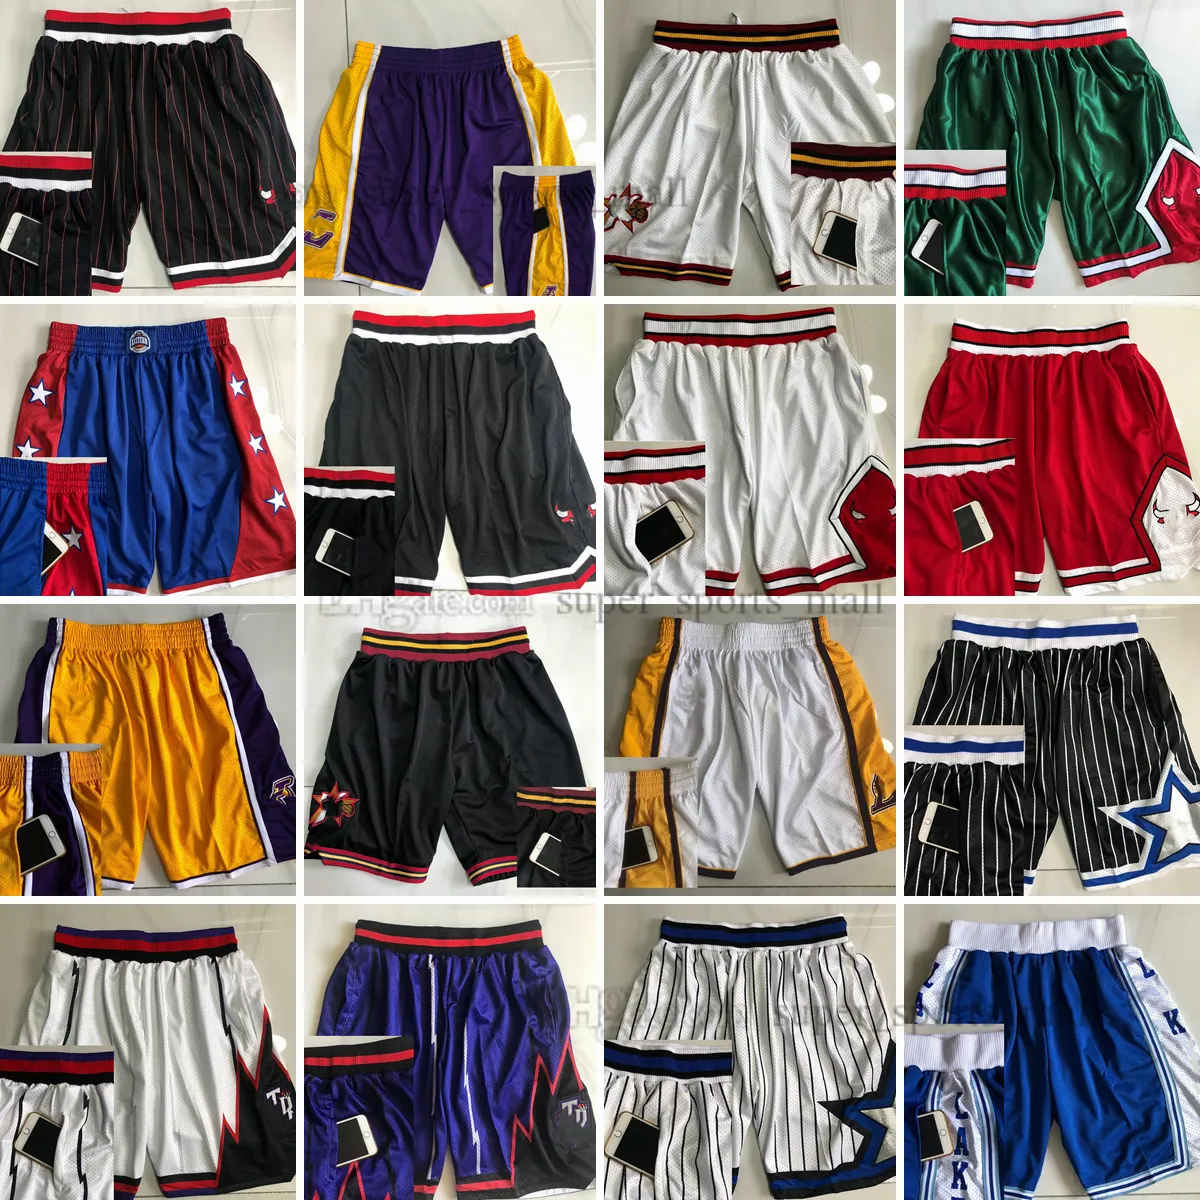 Basketball Shorts Sport Wear With Pocket on Side Big Face All Team Short Sweatpants Men Fashion Style Mesh Retro Good Quality Short White Black Red